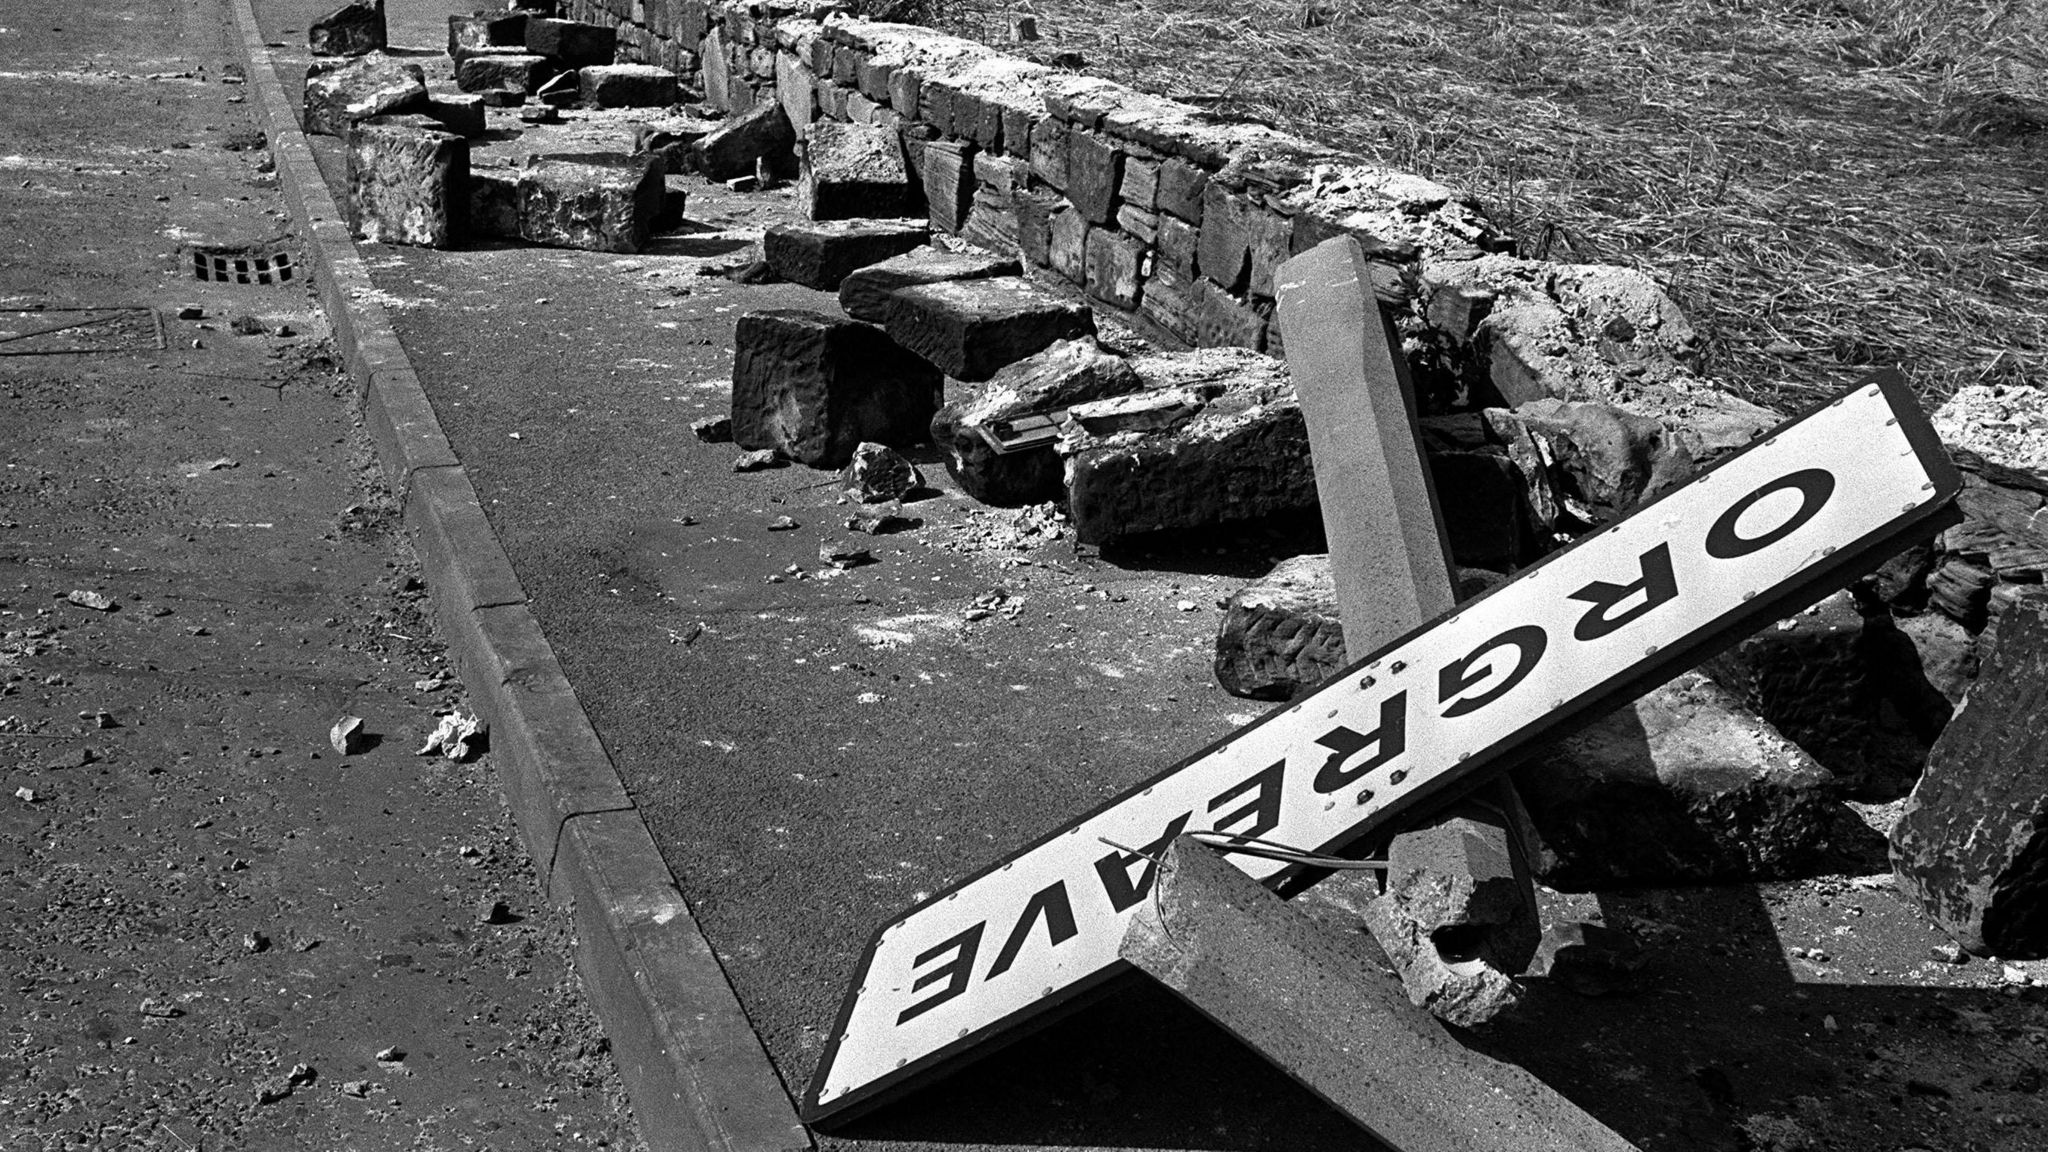 Broken Orgreave sign following violence on 18 June 1984